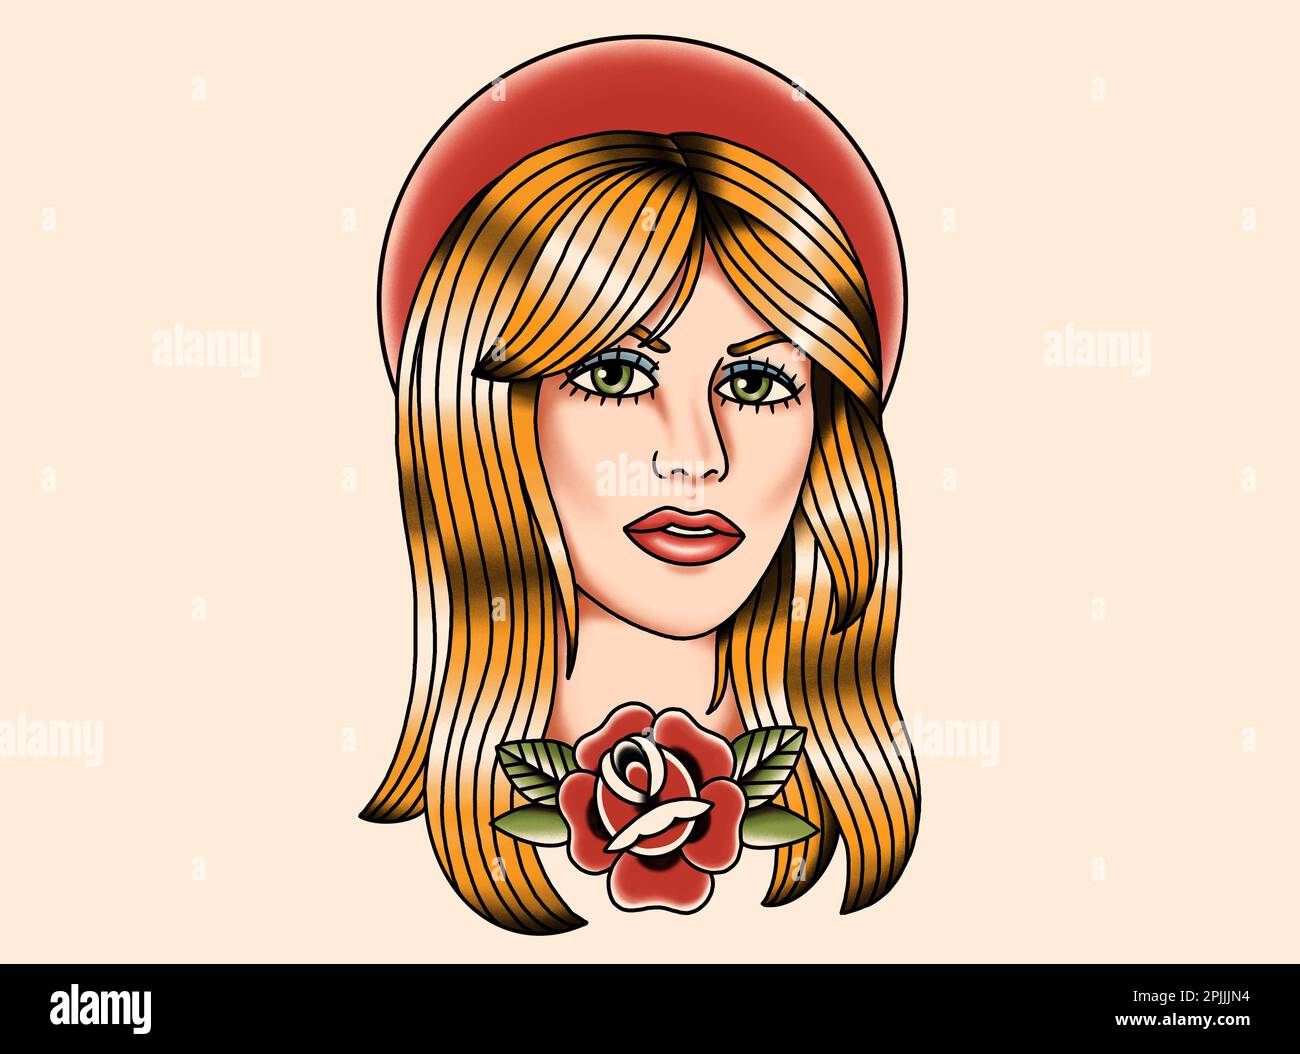 Blond Woman face portrait full colored drawing inspired by the old school traditional tattoo art style Stock Photo